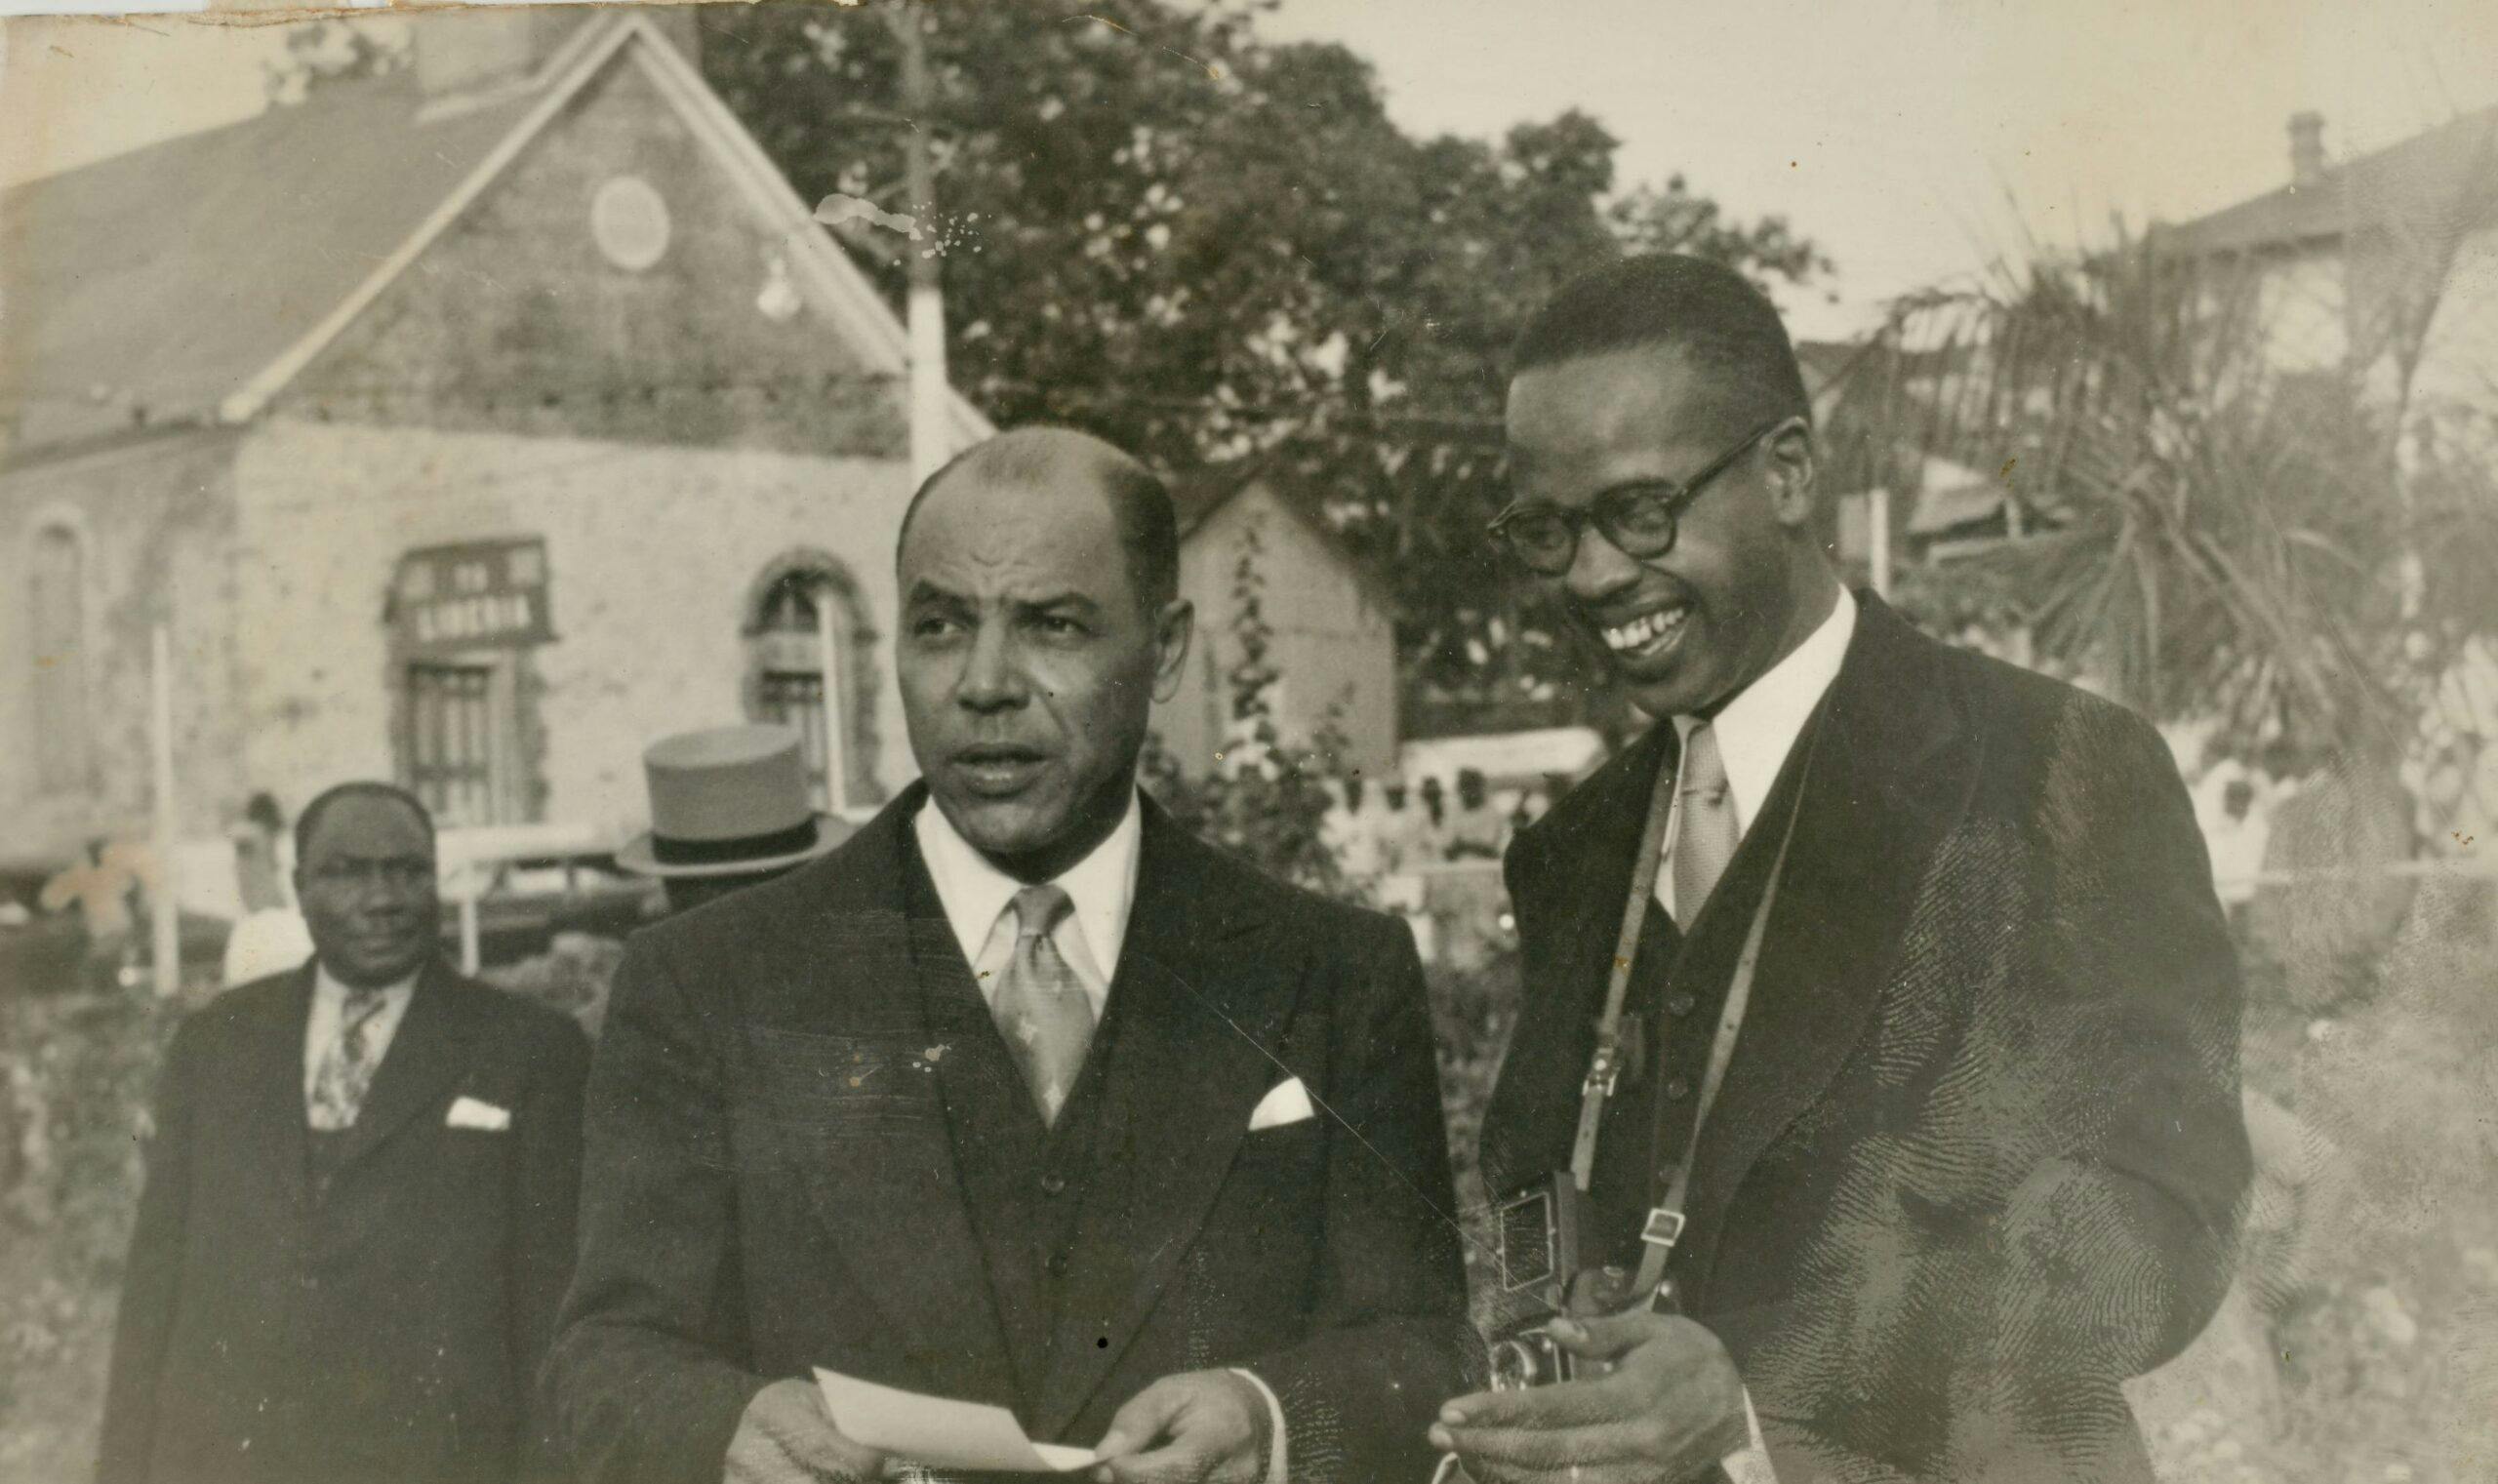 Old Photo of Ambassador Dudley with a photographer next to him. He is shown in a suit looking into the distance